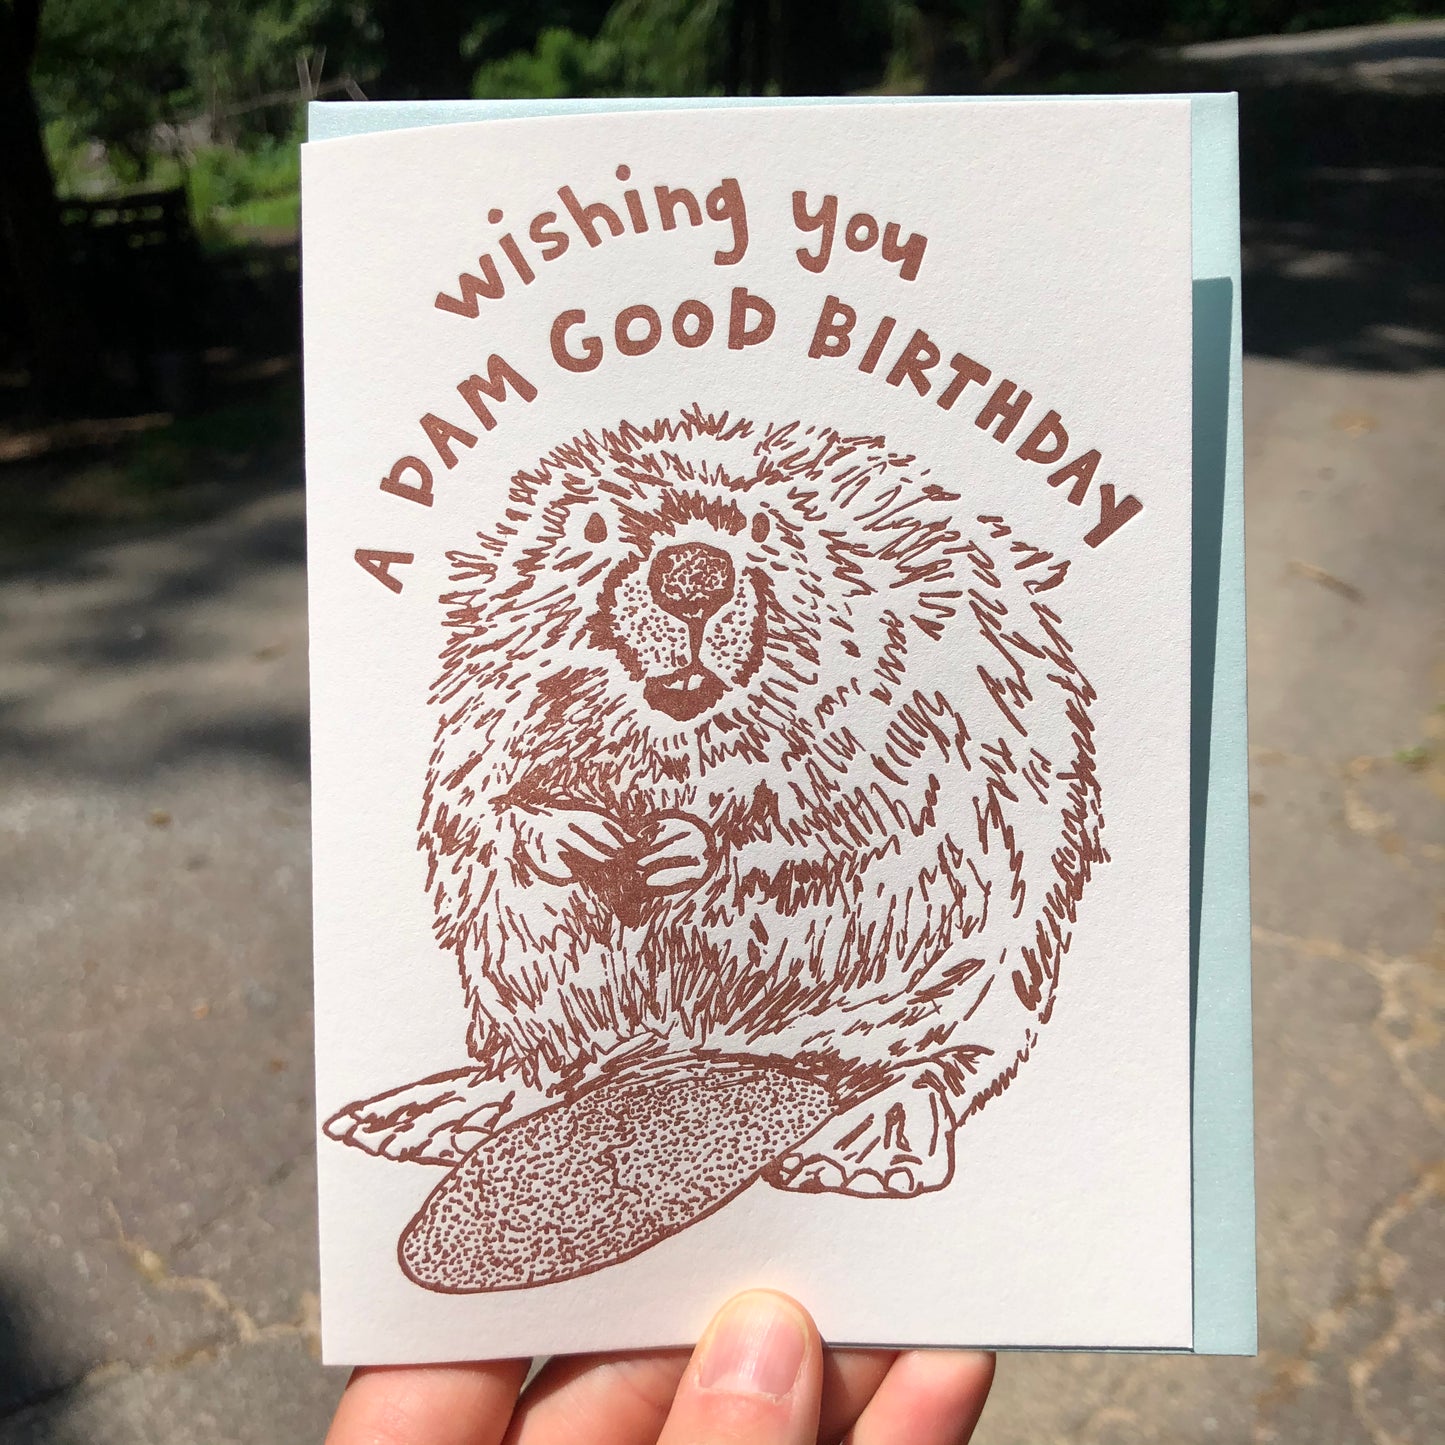 Letterpress greeting card featuring a hand-drawn Beaver printed in an earthy brown ink. "Wishing you a Dam Good Birthday!" is written on the top above the beaver in a whimsical hand-drawn text, in the same brown ink. The card is white, blank inside, and is paired with a light sky blue envelope. Card is being held up outside on a sunny day. 